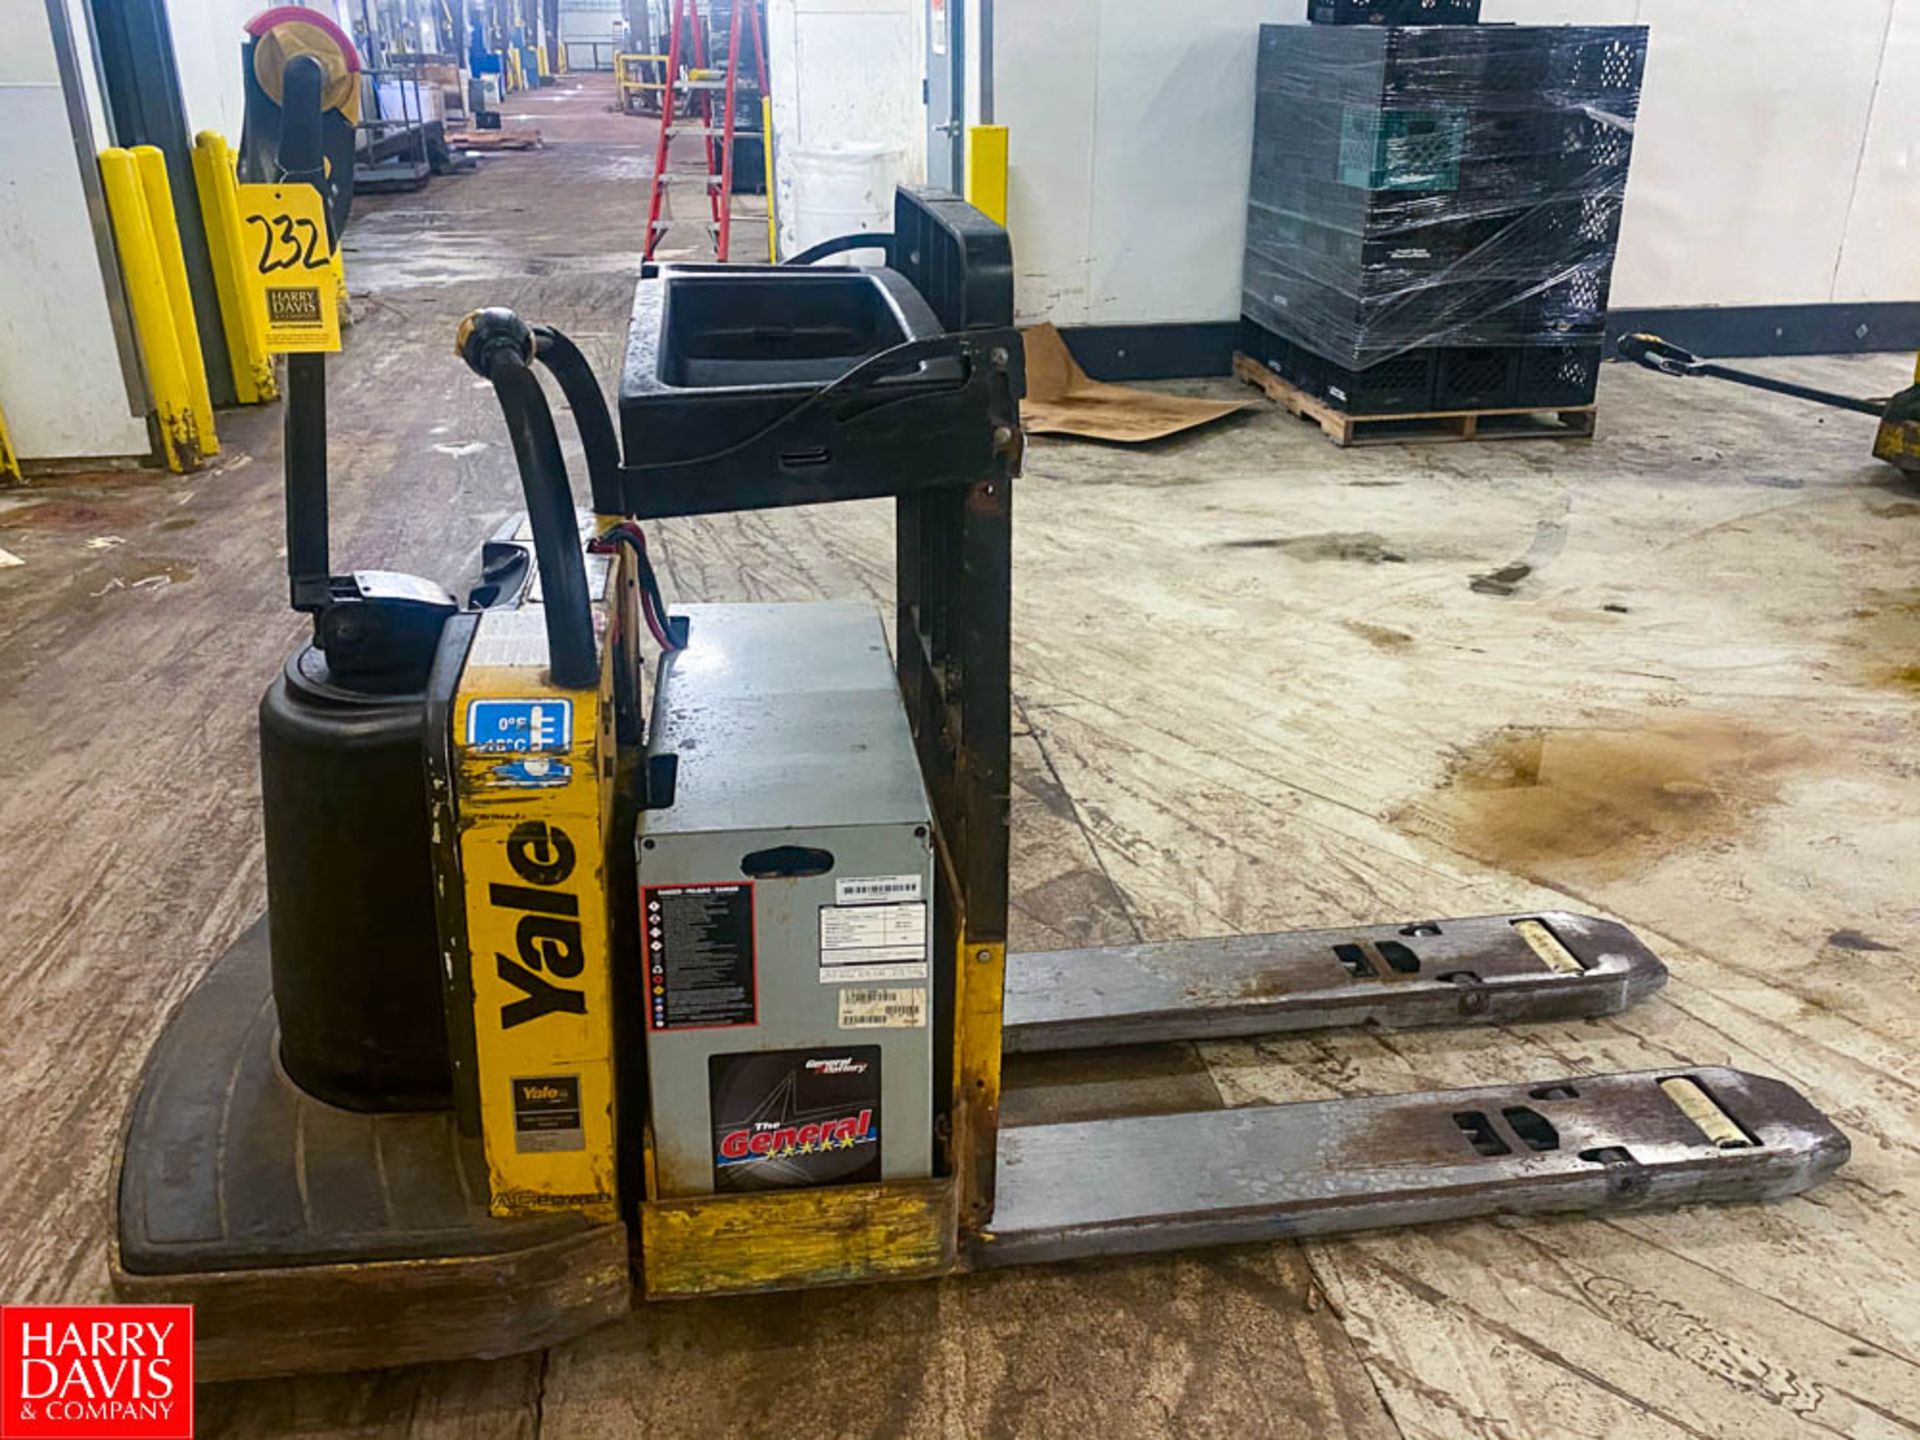 Yale Electric Pallet Jack Ride On 6000lb Capacity Model: MPW060SCN12T2748 - Rigging Fee: $ 150